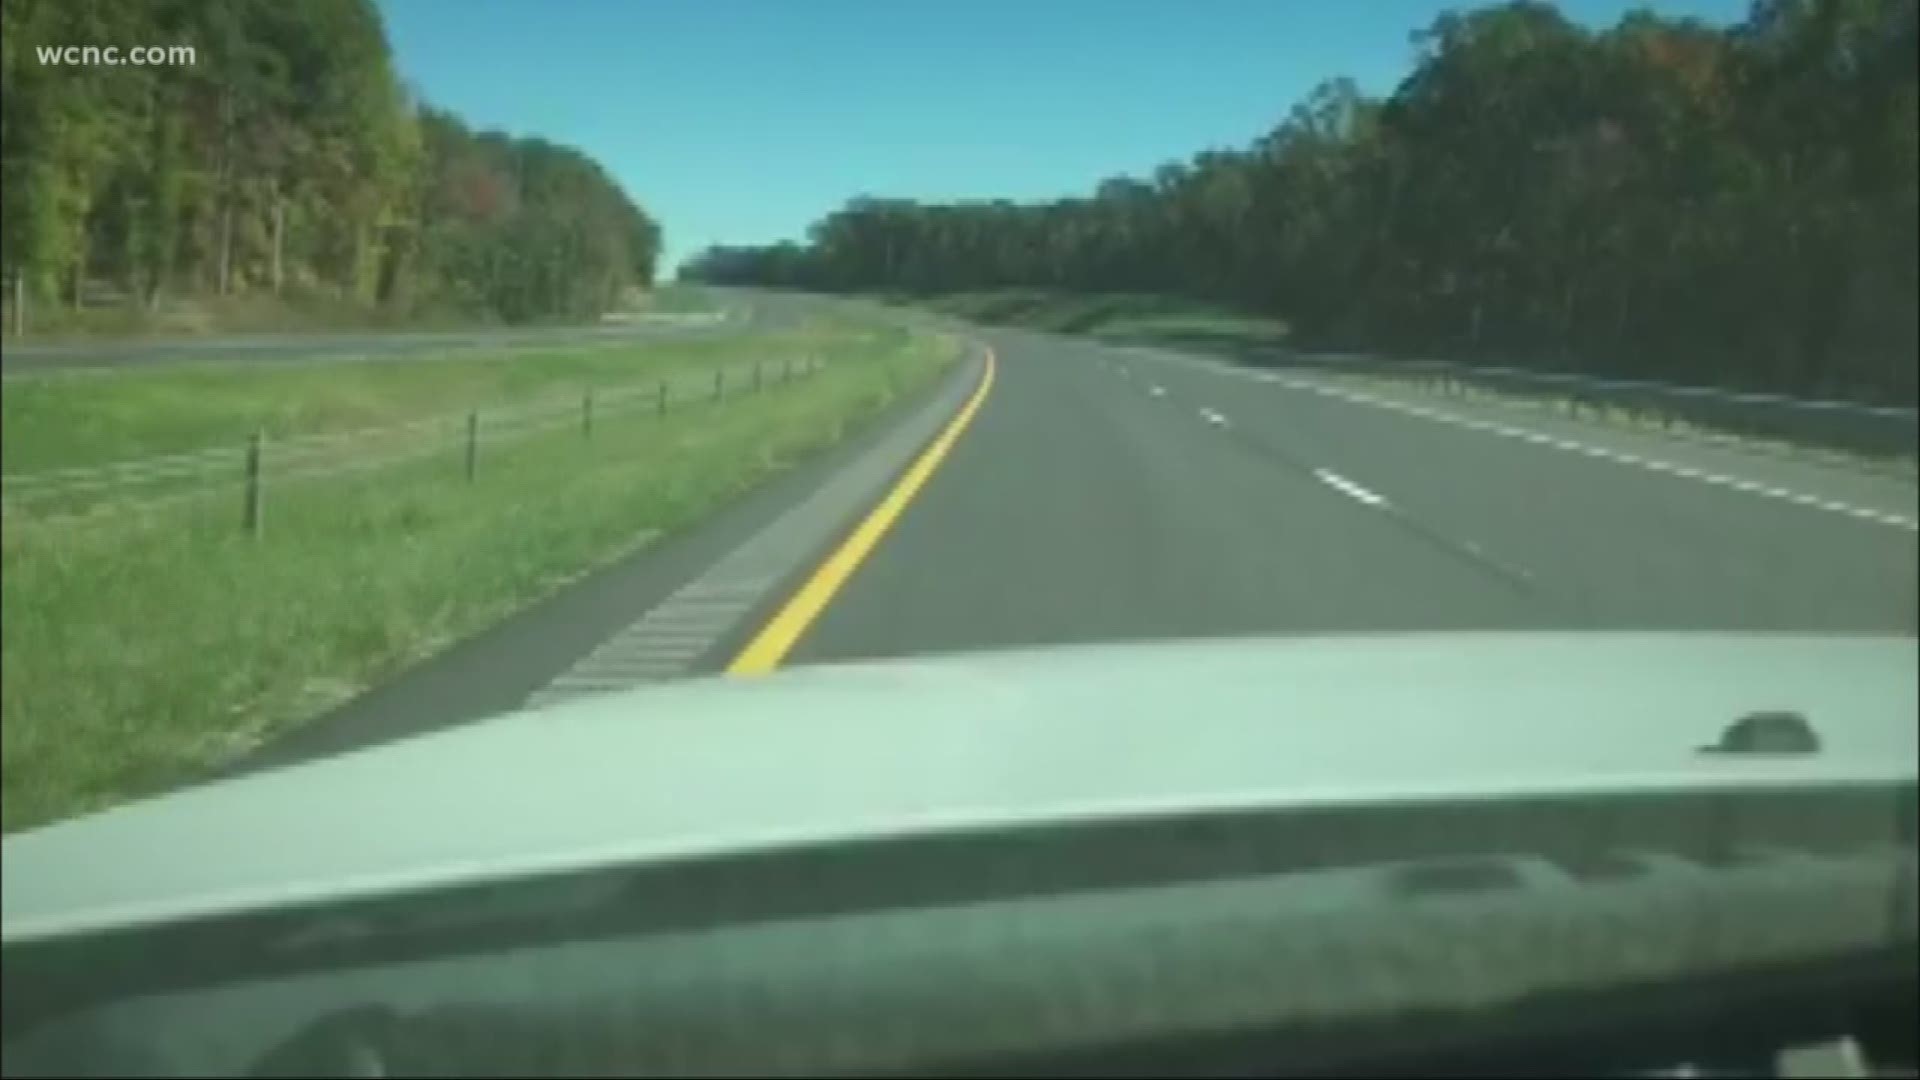 The new Monroe expressway will open November 27, it will make it easier to drive to and from the Carolina coast.